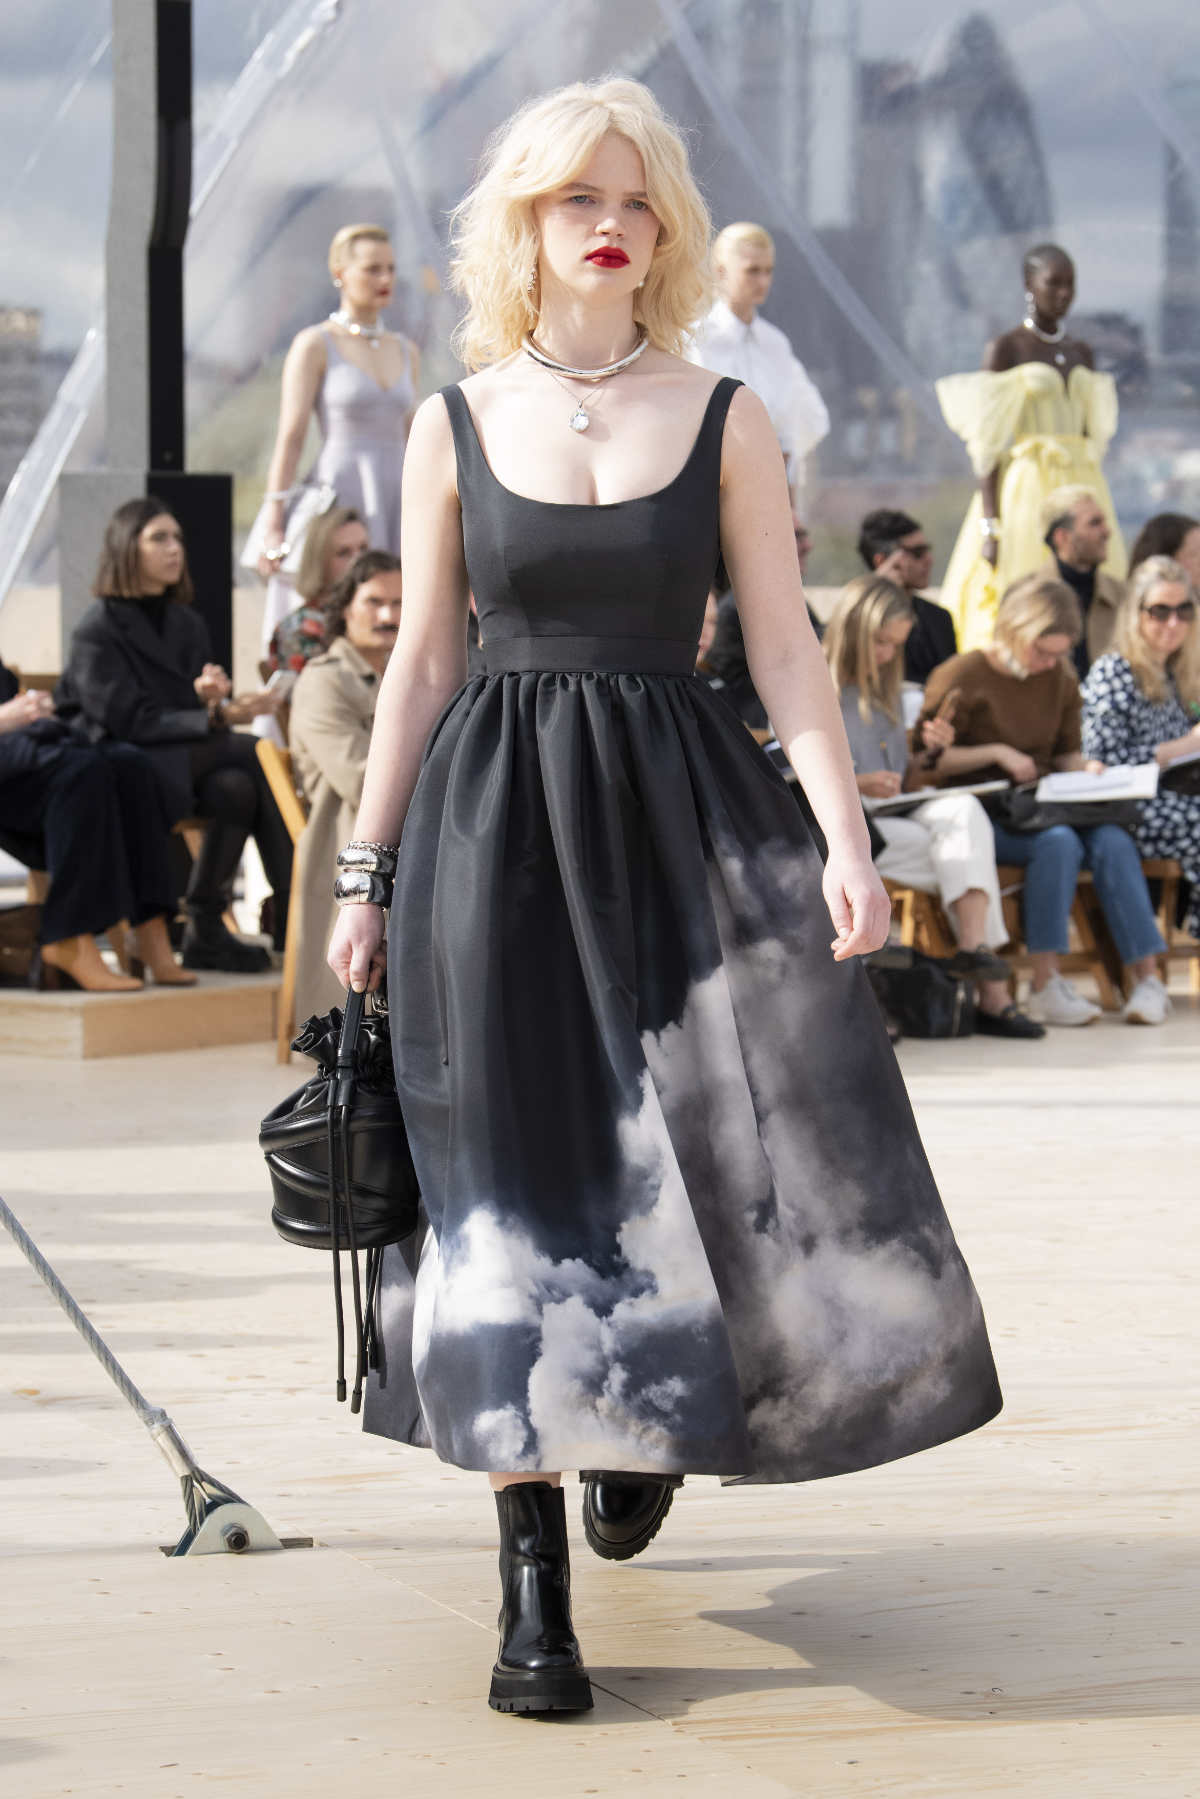 Alexander McQueen Presents Its New Spring/Summer 2022 Womenswear Collection: London Skies